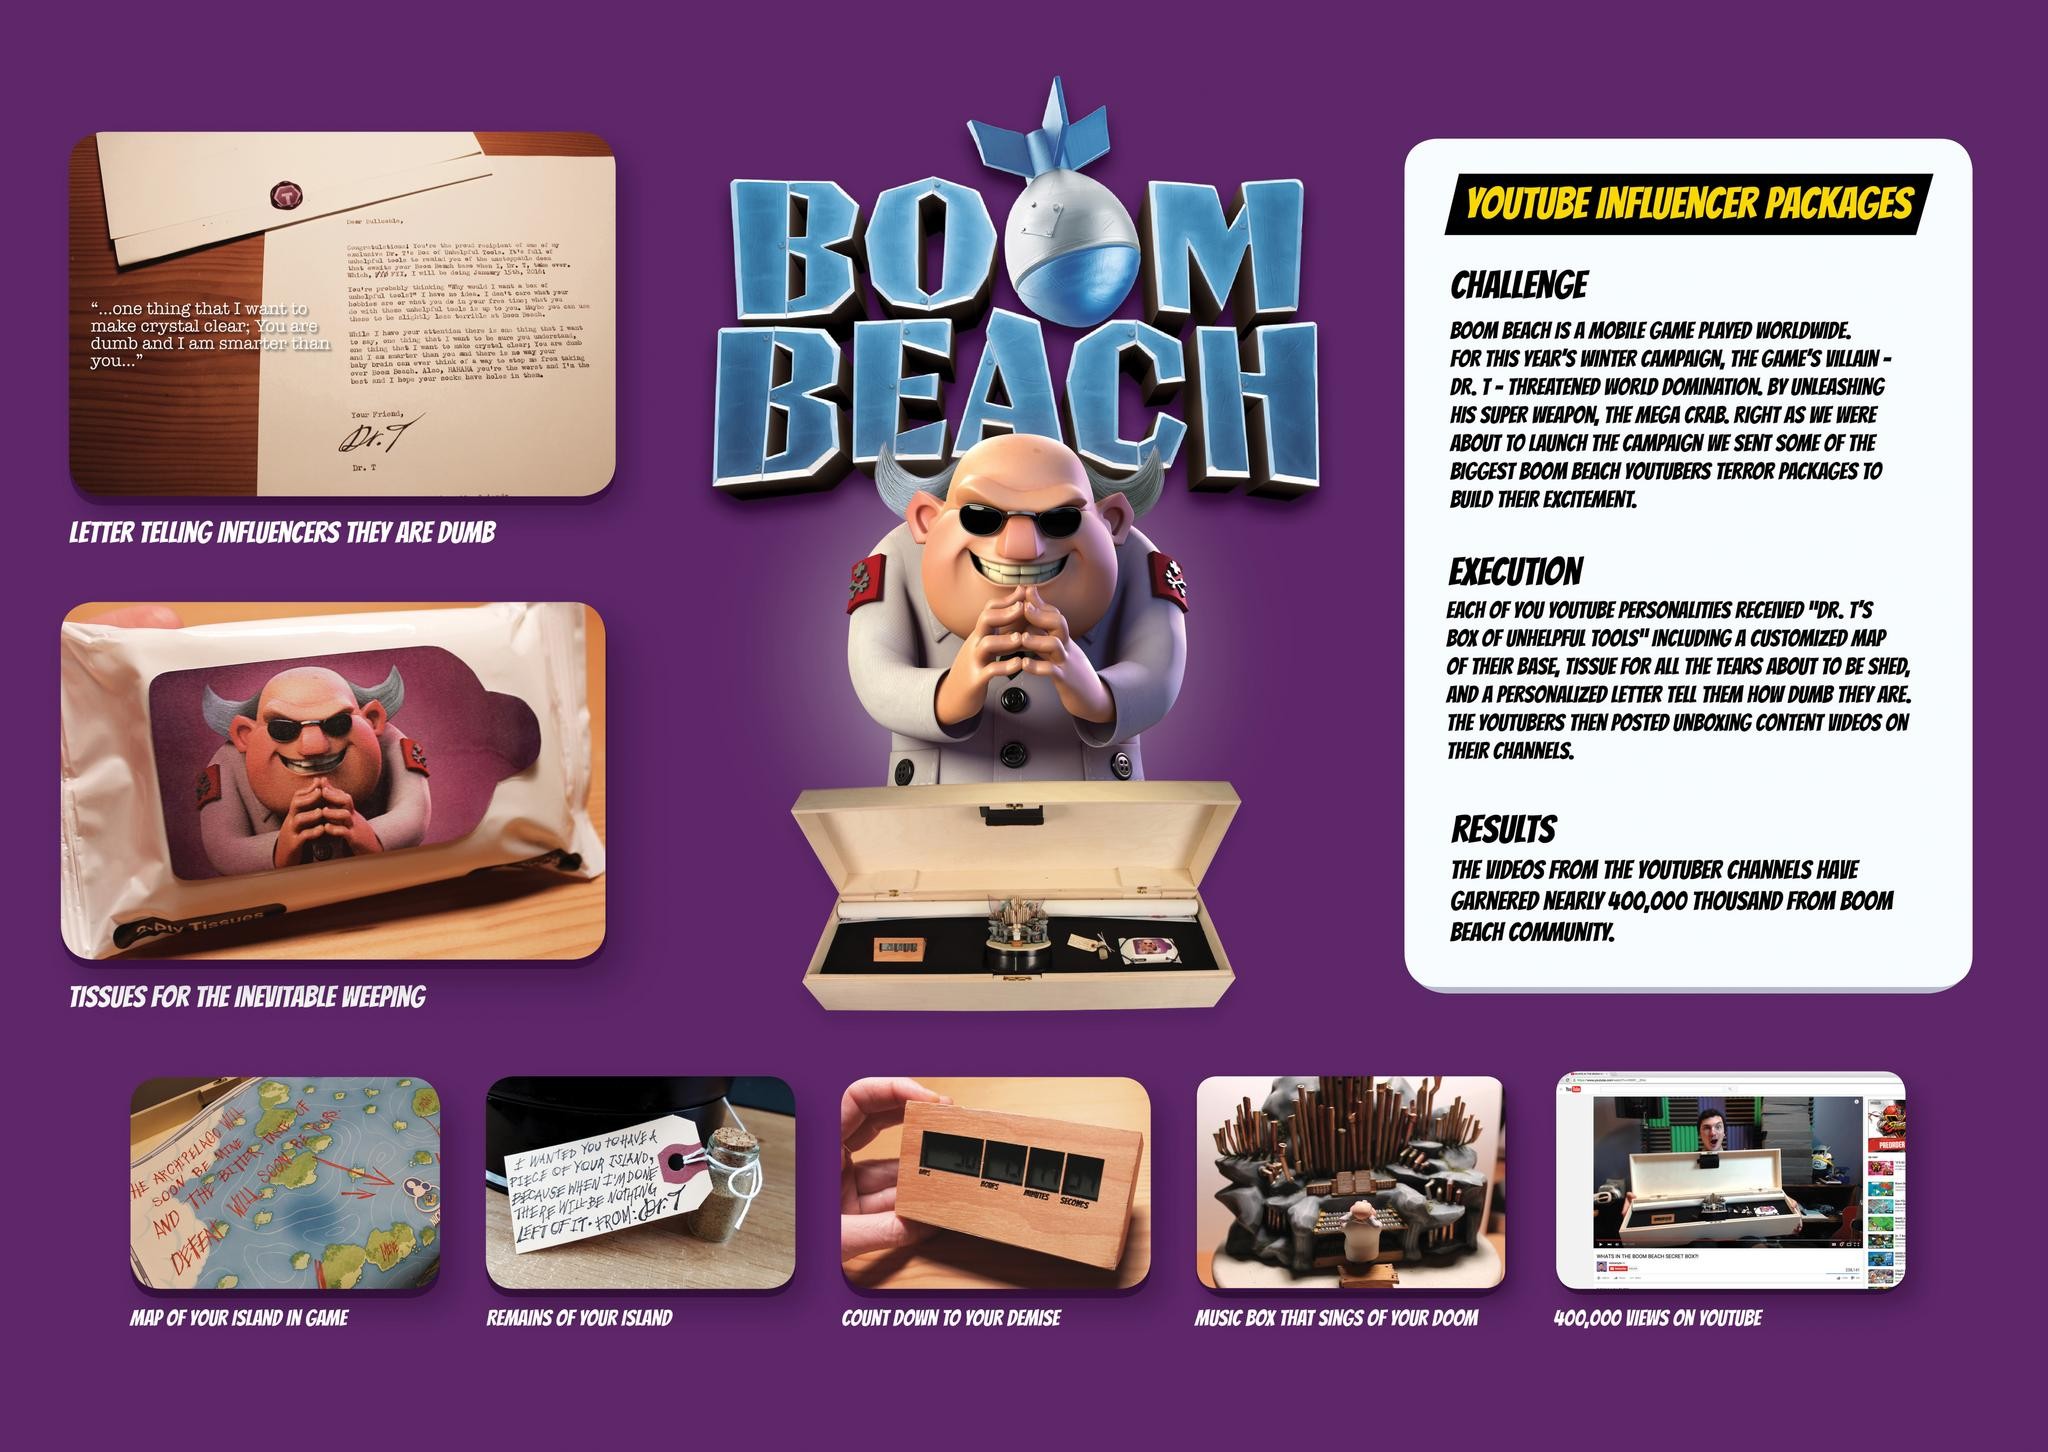 Boom Beach Influencer Packages